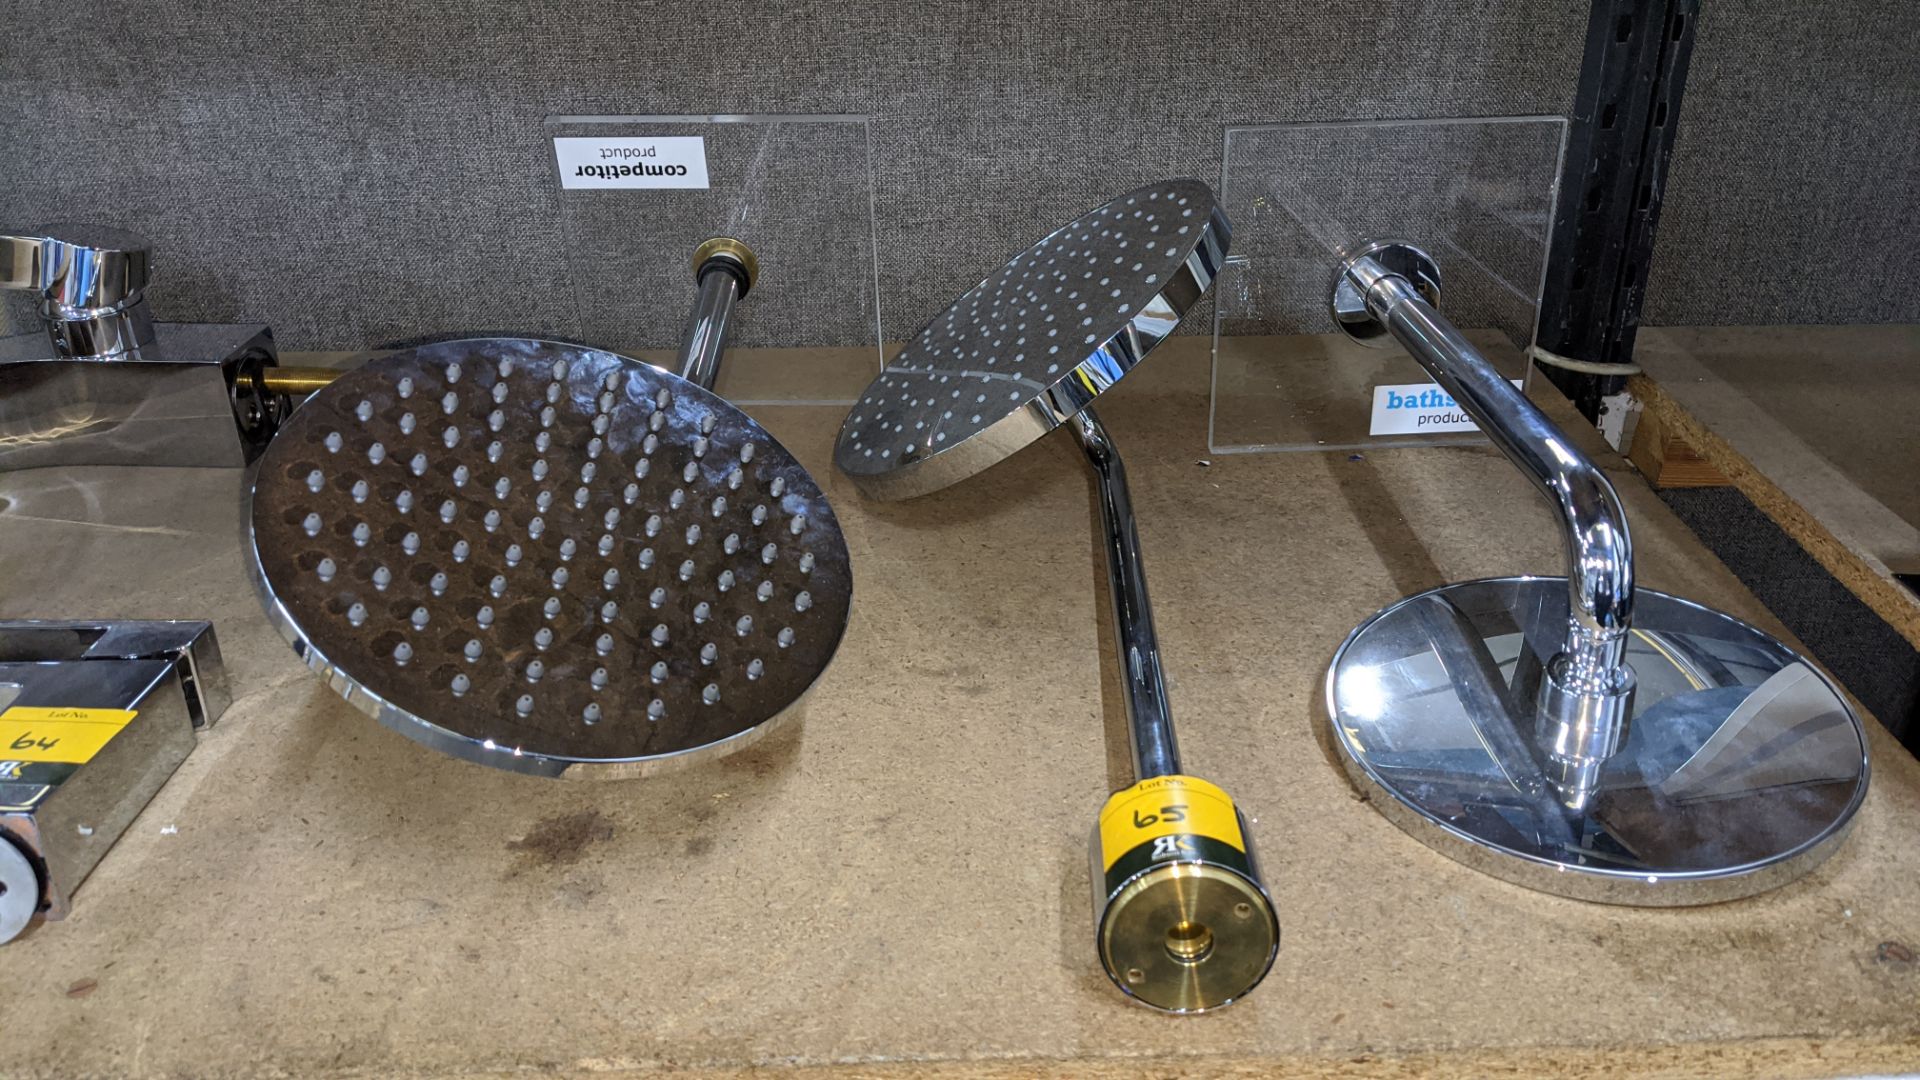 3 off assorted rain shower heads. IMPORTANT: Please remember goods successfully bid upon must be